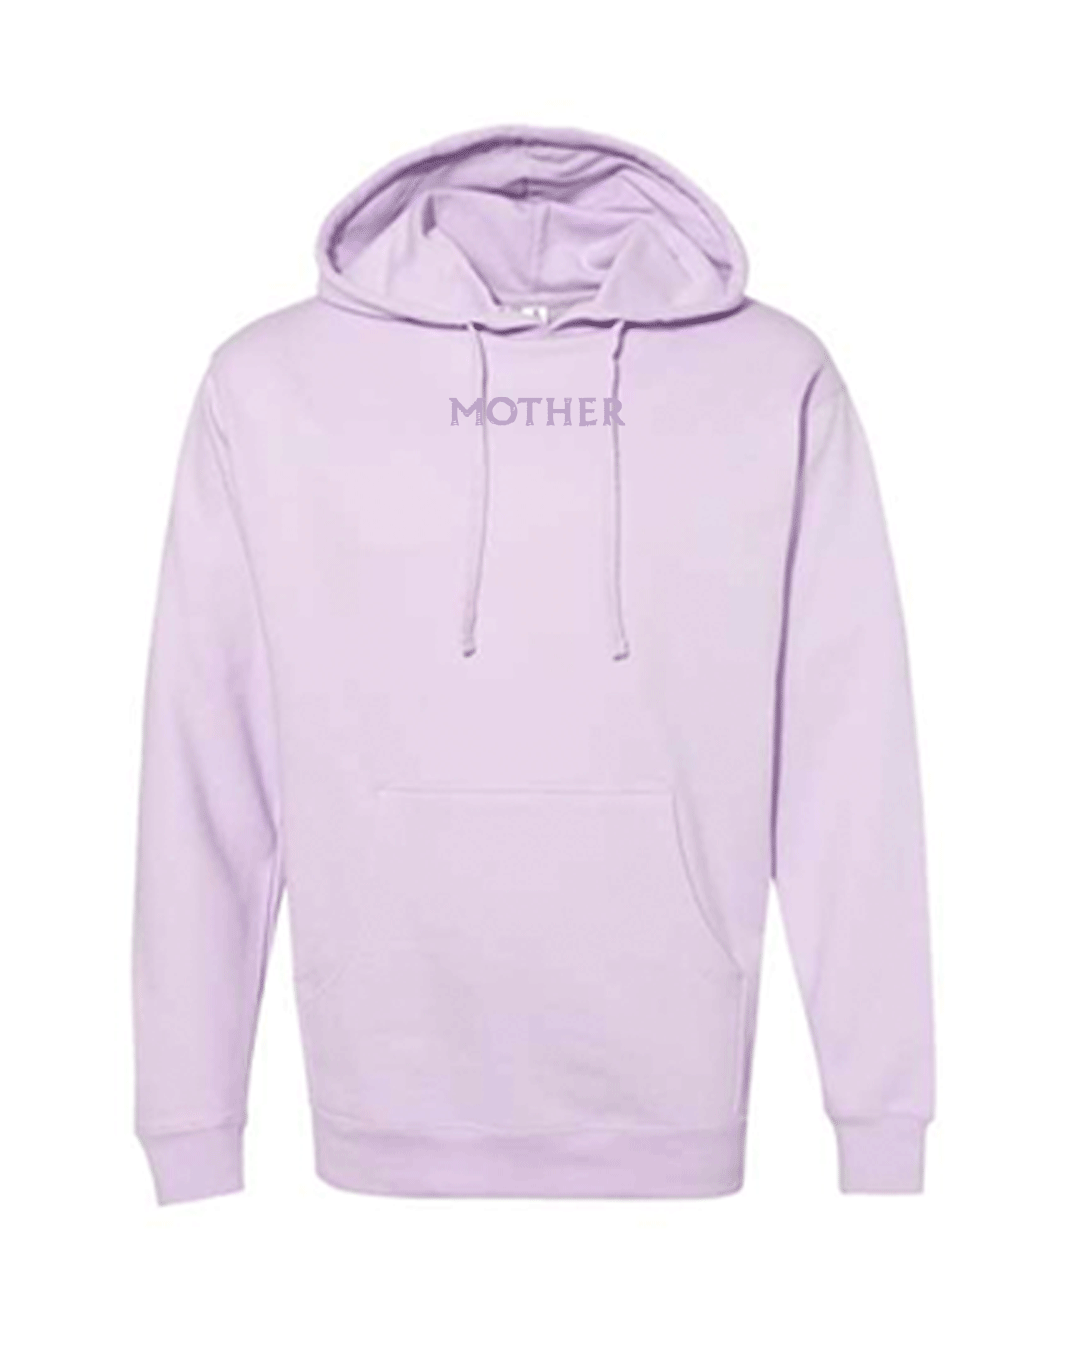 Mother's Day Embroidered Hoodie